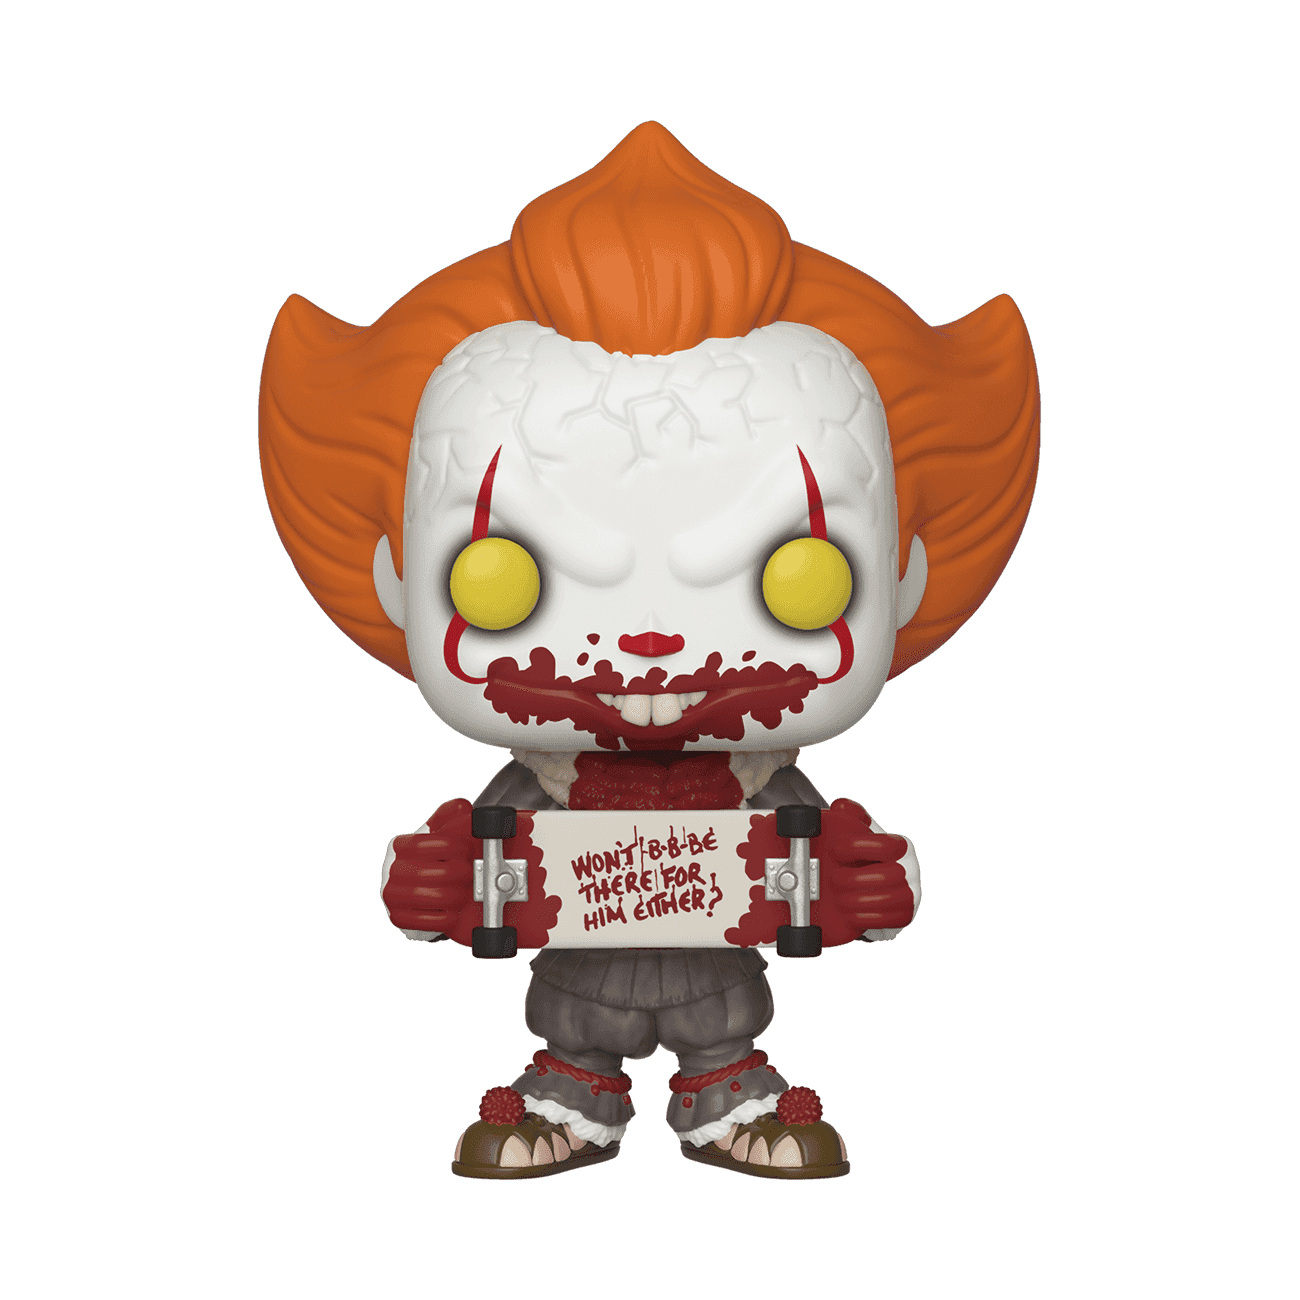 image de Pennywise